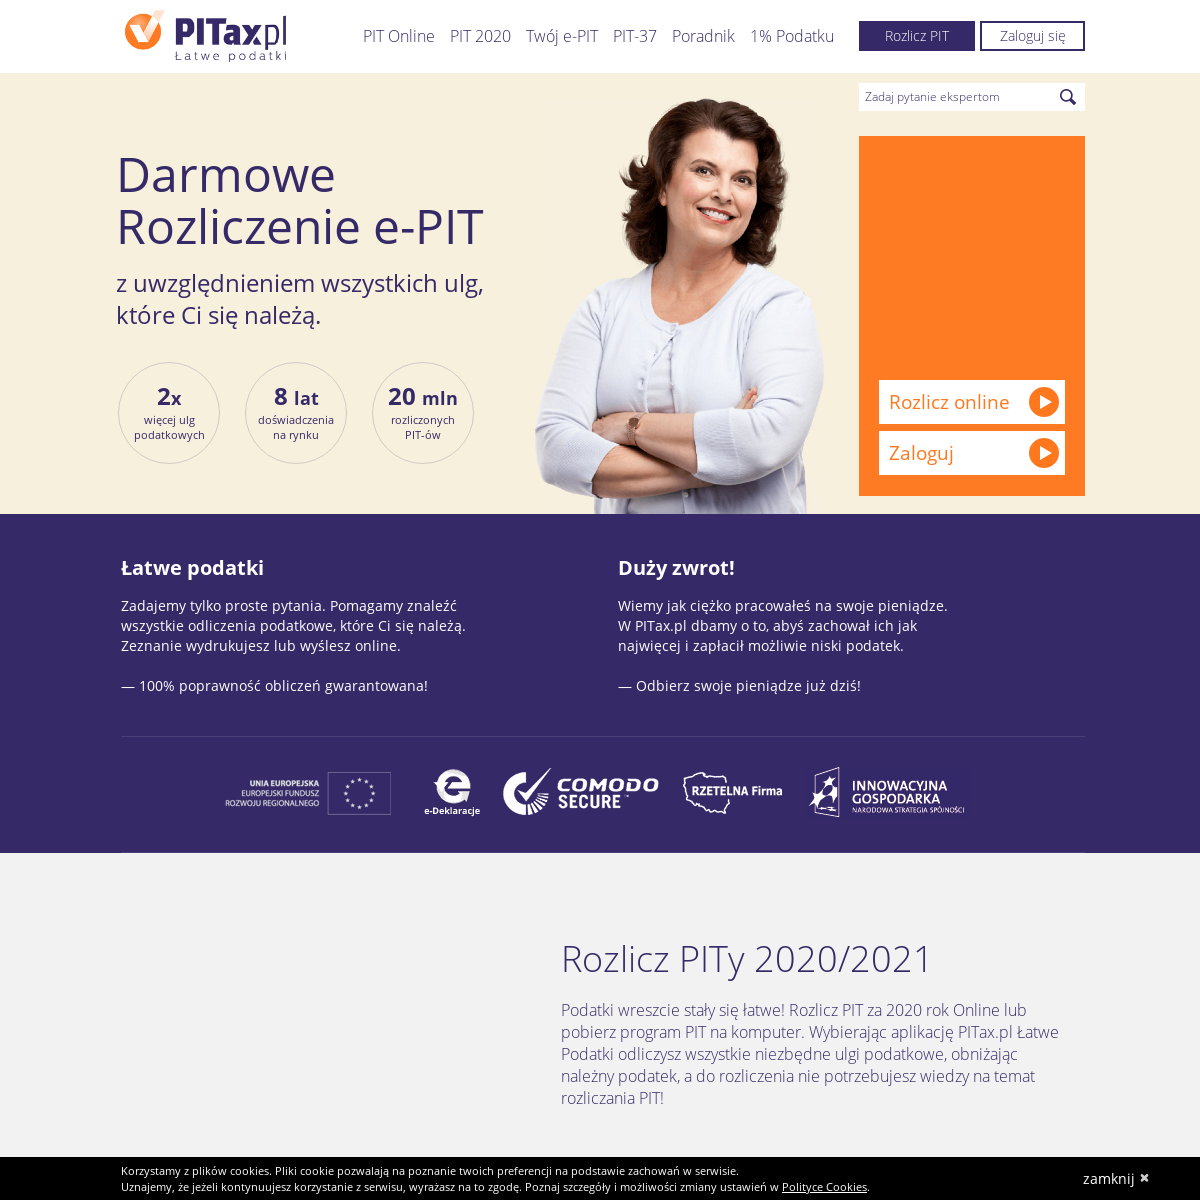 A complete backup of pitax.pl